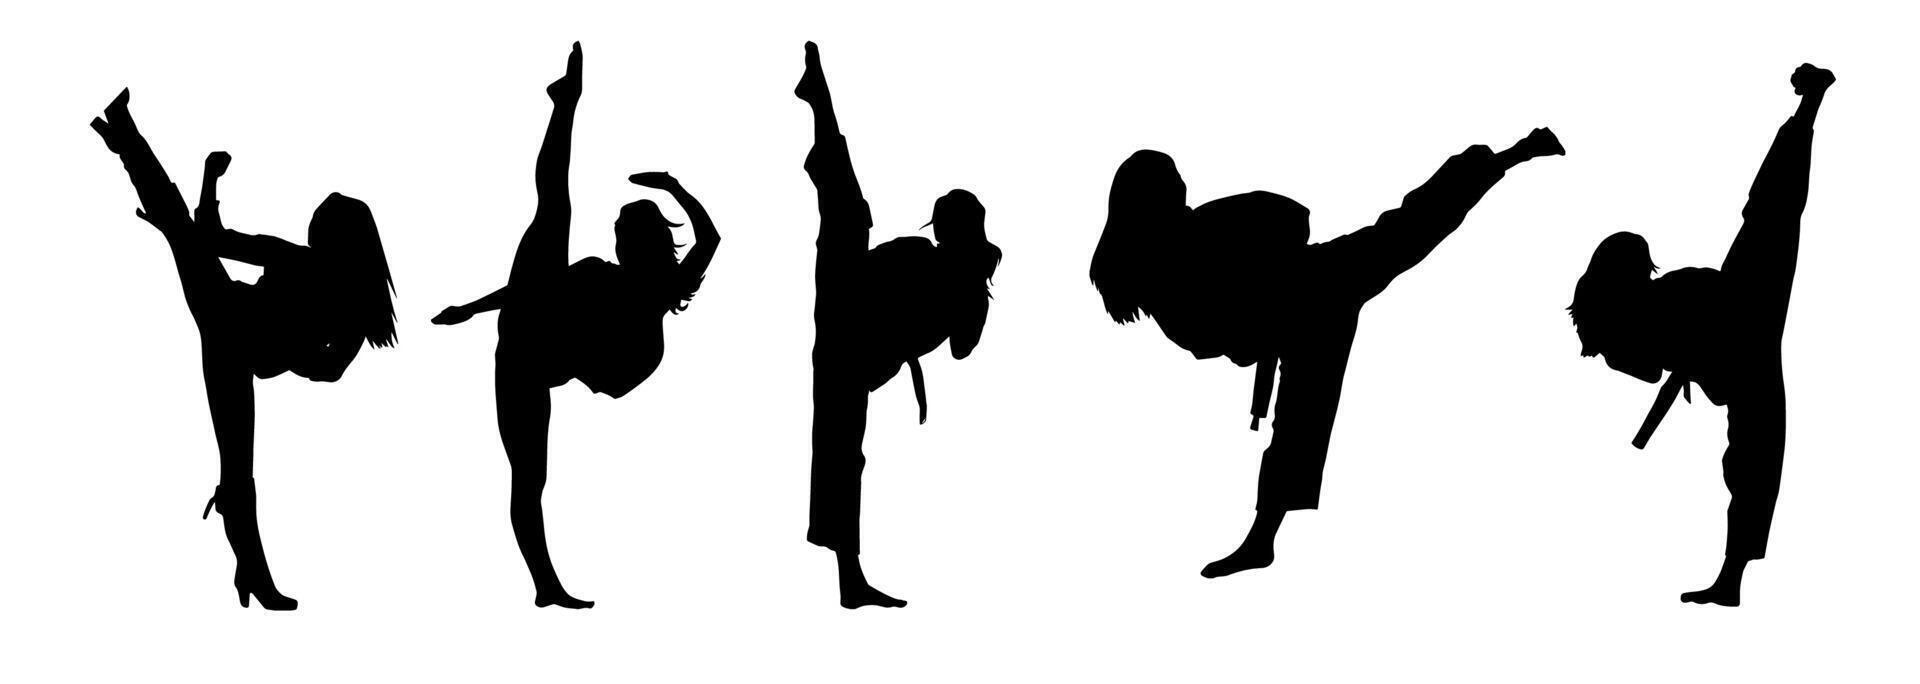 Silhouette collection of martial art women kicking pose. Silhouette of female warriors in action pose. vector